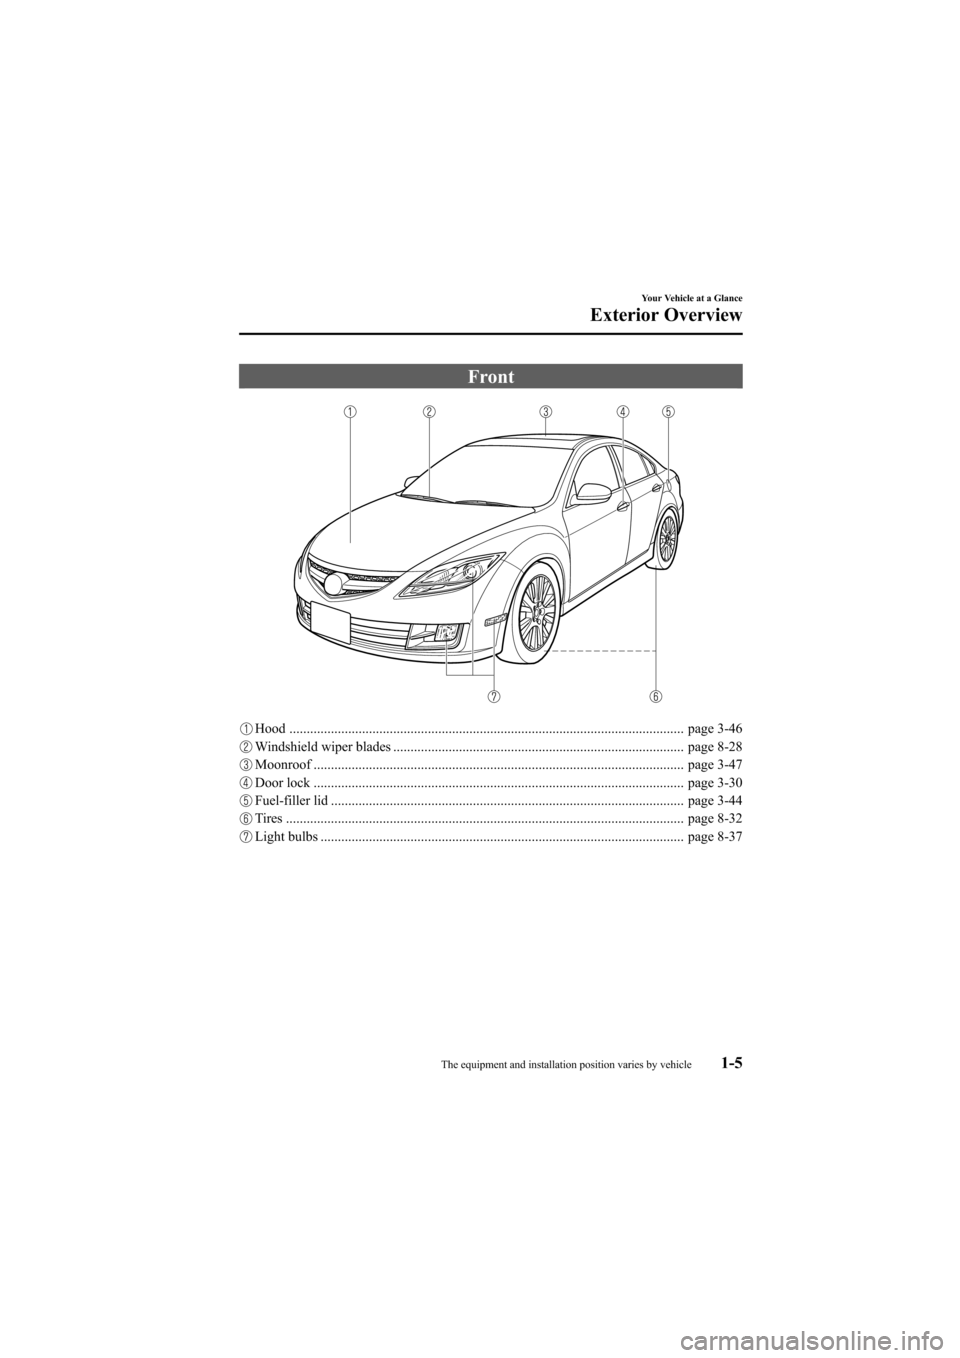 MAZDA MODEL 6 2009  Owners Manual (in English) Black plate (11,1)
Front
Hood .................................................................................................................. page 3-46
Windshield wiper blades .....................